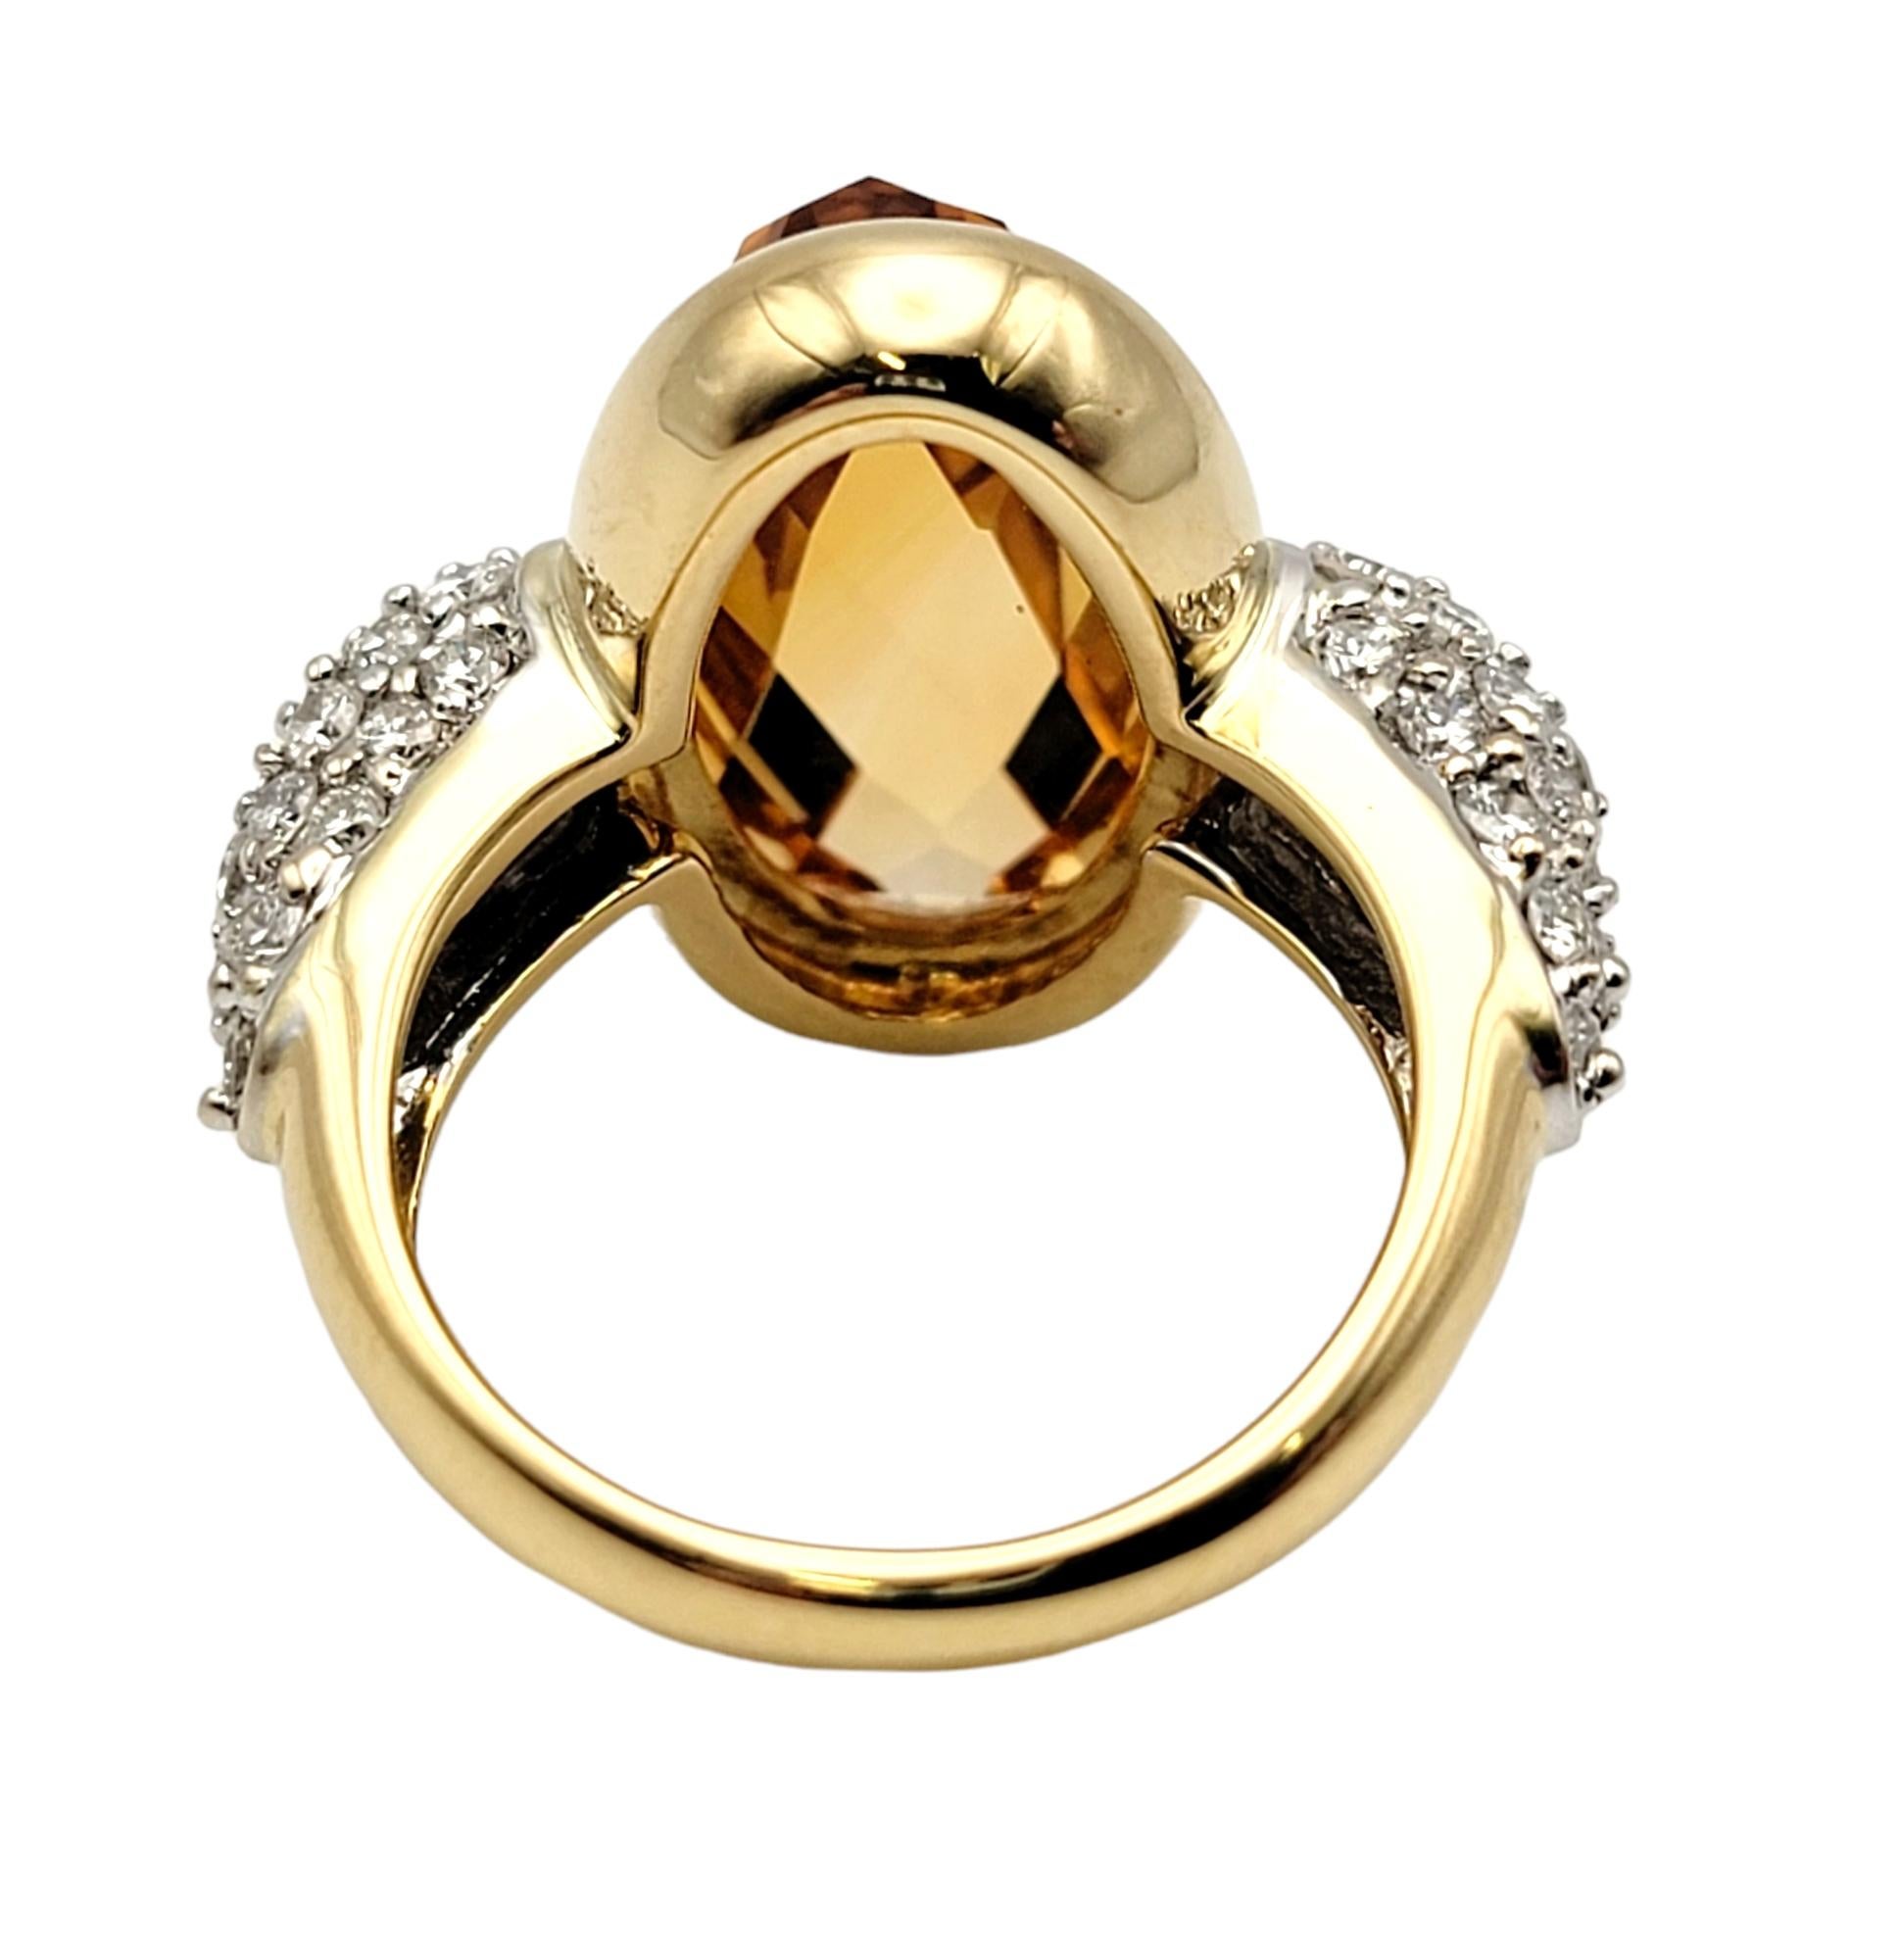 Large Fancy Cut Oval Citrine and Pave Diamond Ring in 18 Karat Yellow Gold In Good Condition For Sale In Scottsdale, AZ